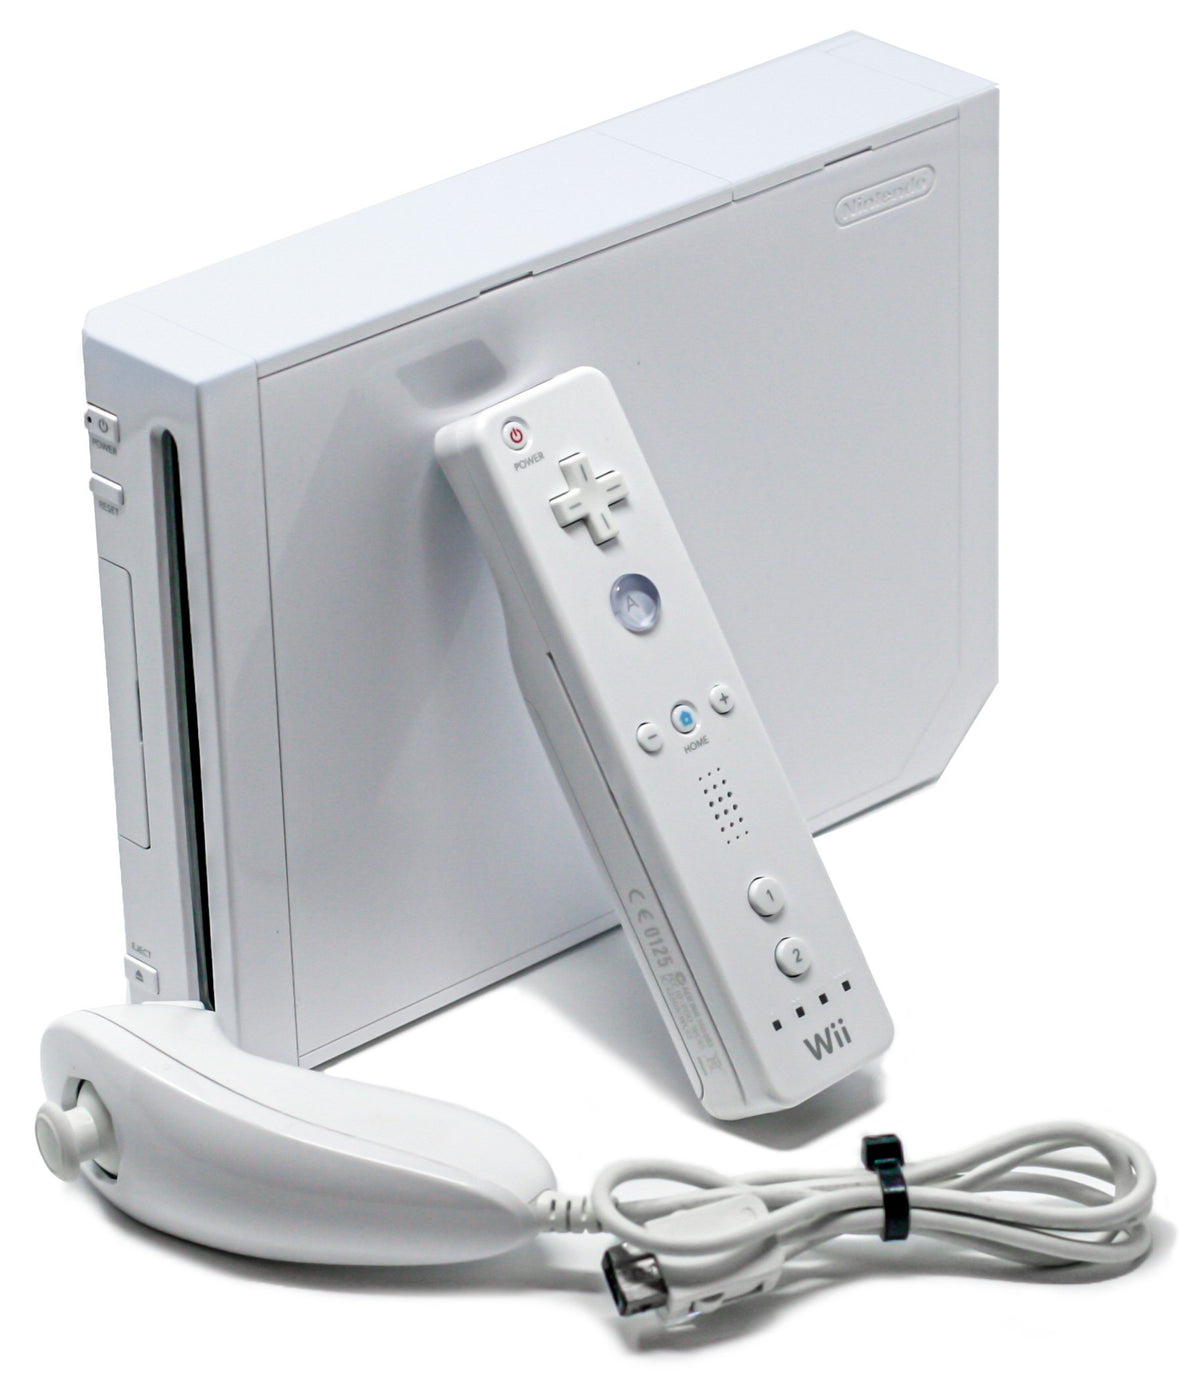 Nintendo Wii Console White - One Remote (Refurbished - Excellent